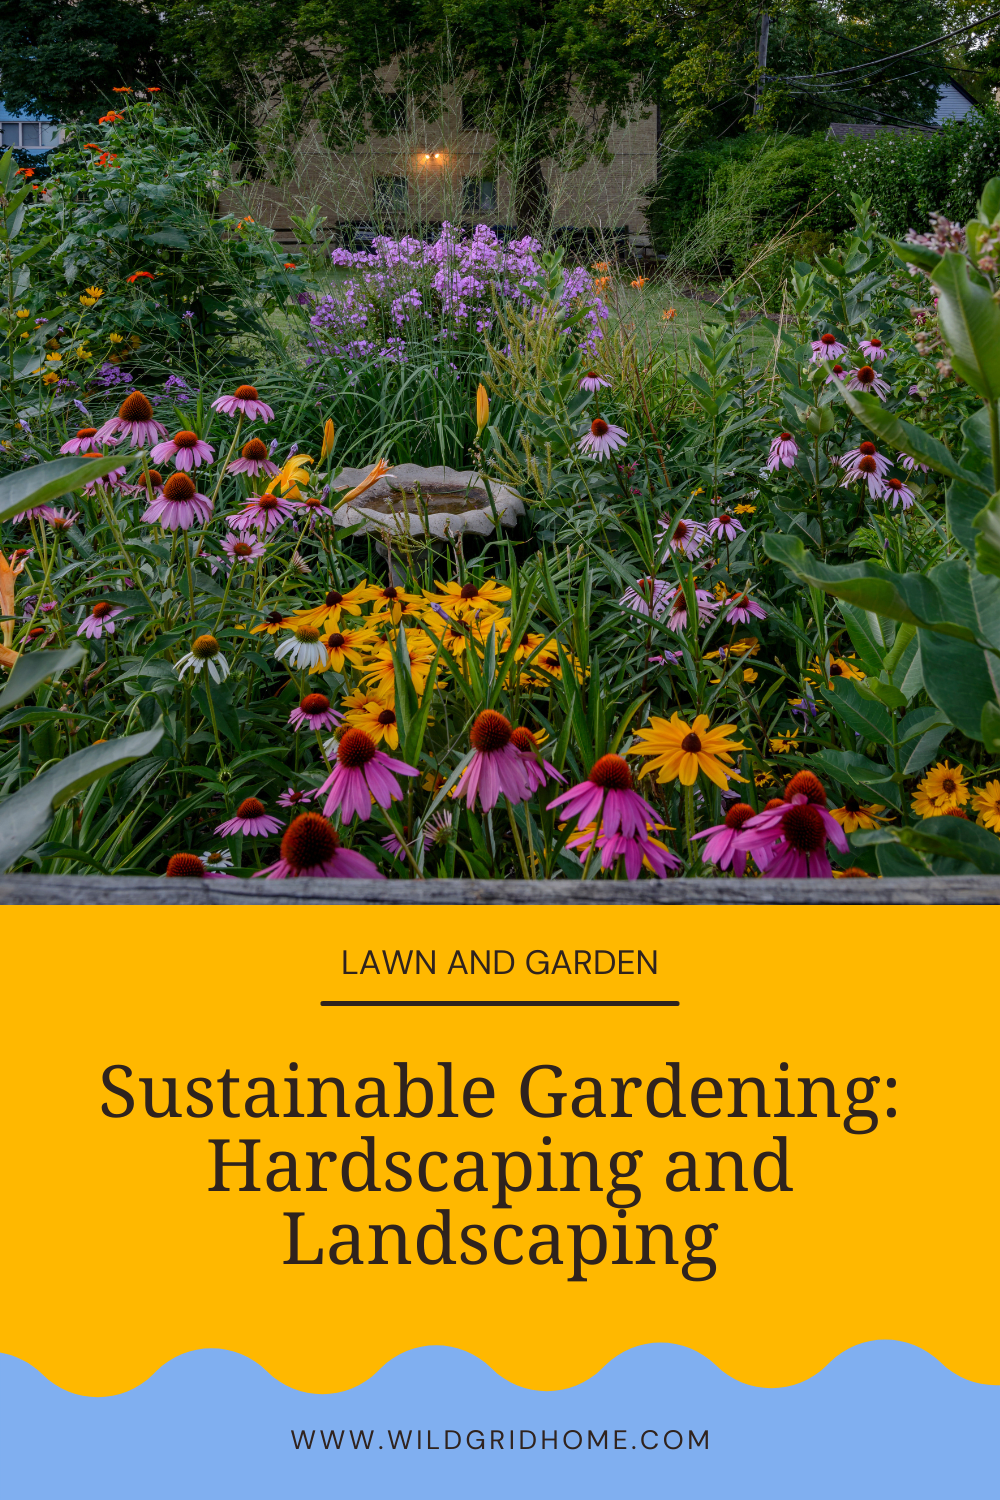 Sustainable Gardening: Hardscaping and Landscaping - Wildgrid Home